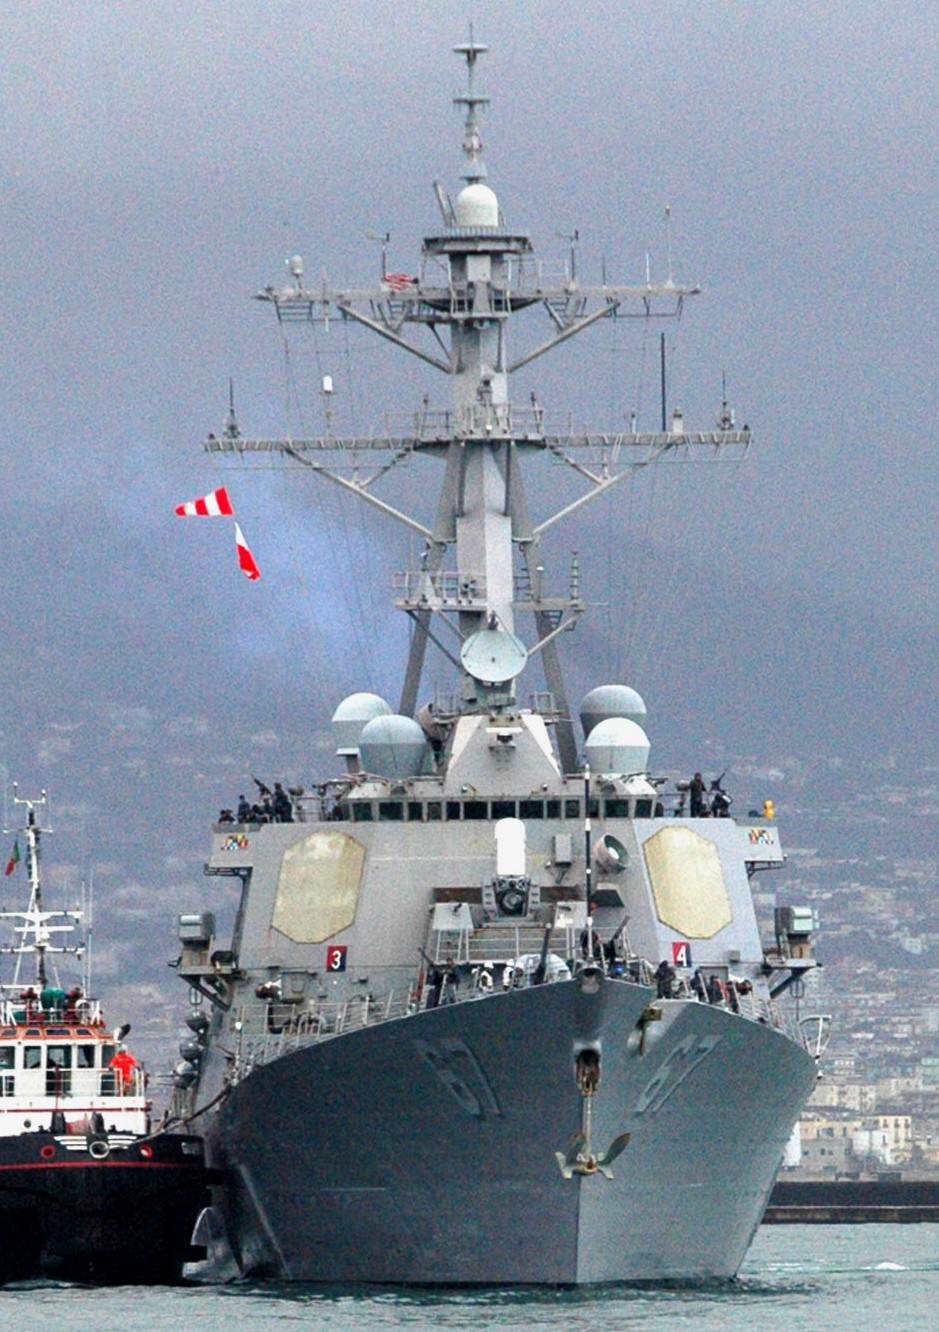 ddg-67 uss cole guided missile destroyer arleigh burke class navy aegis 27